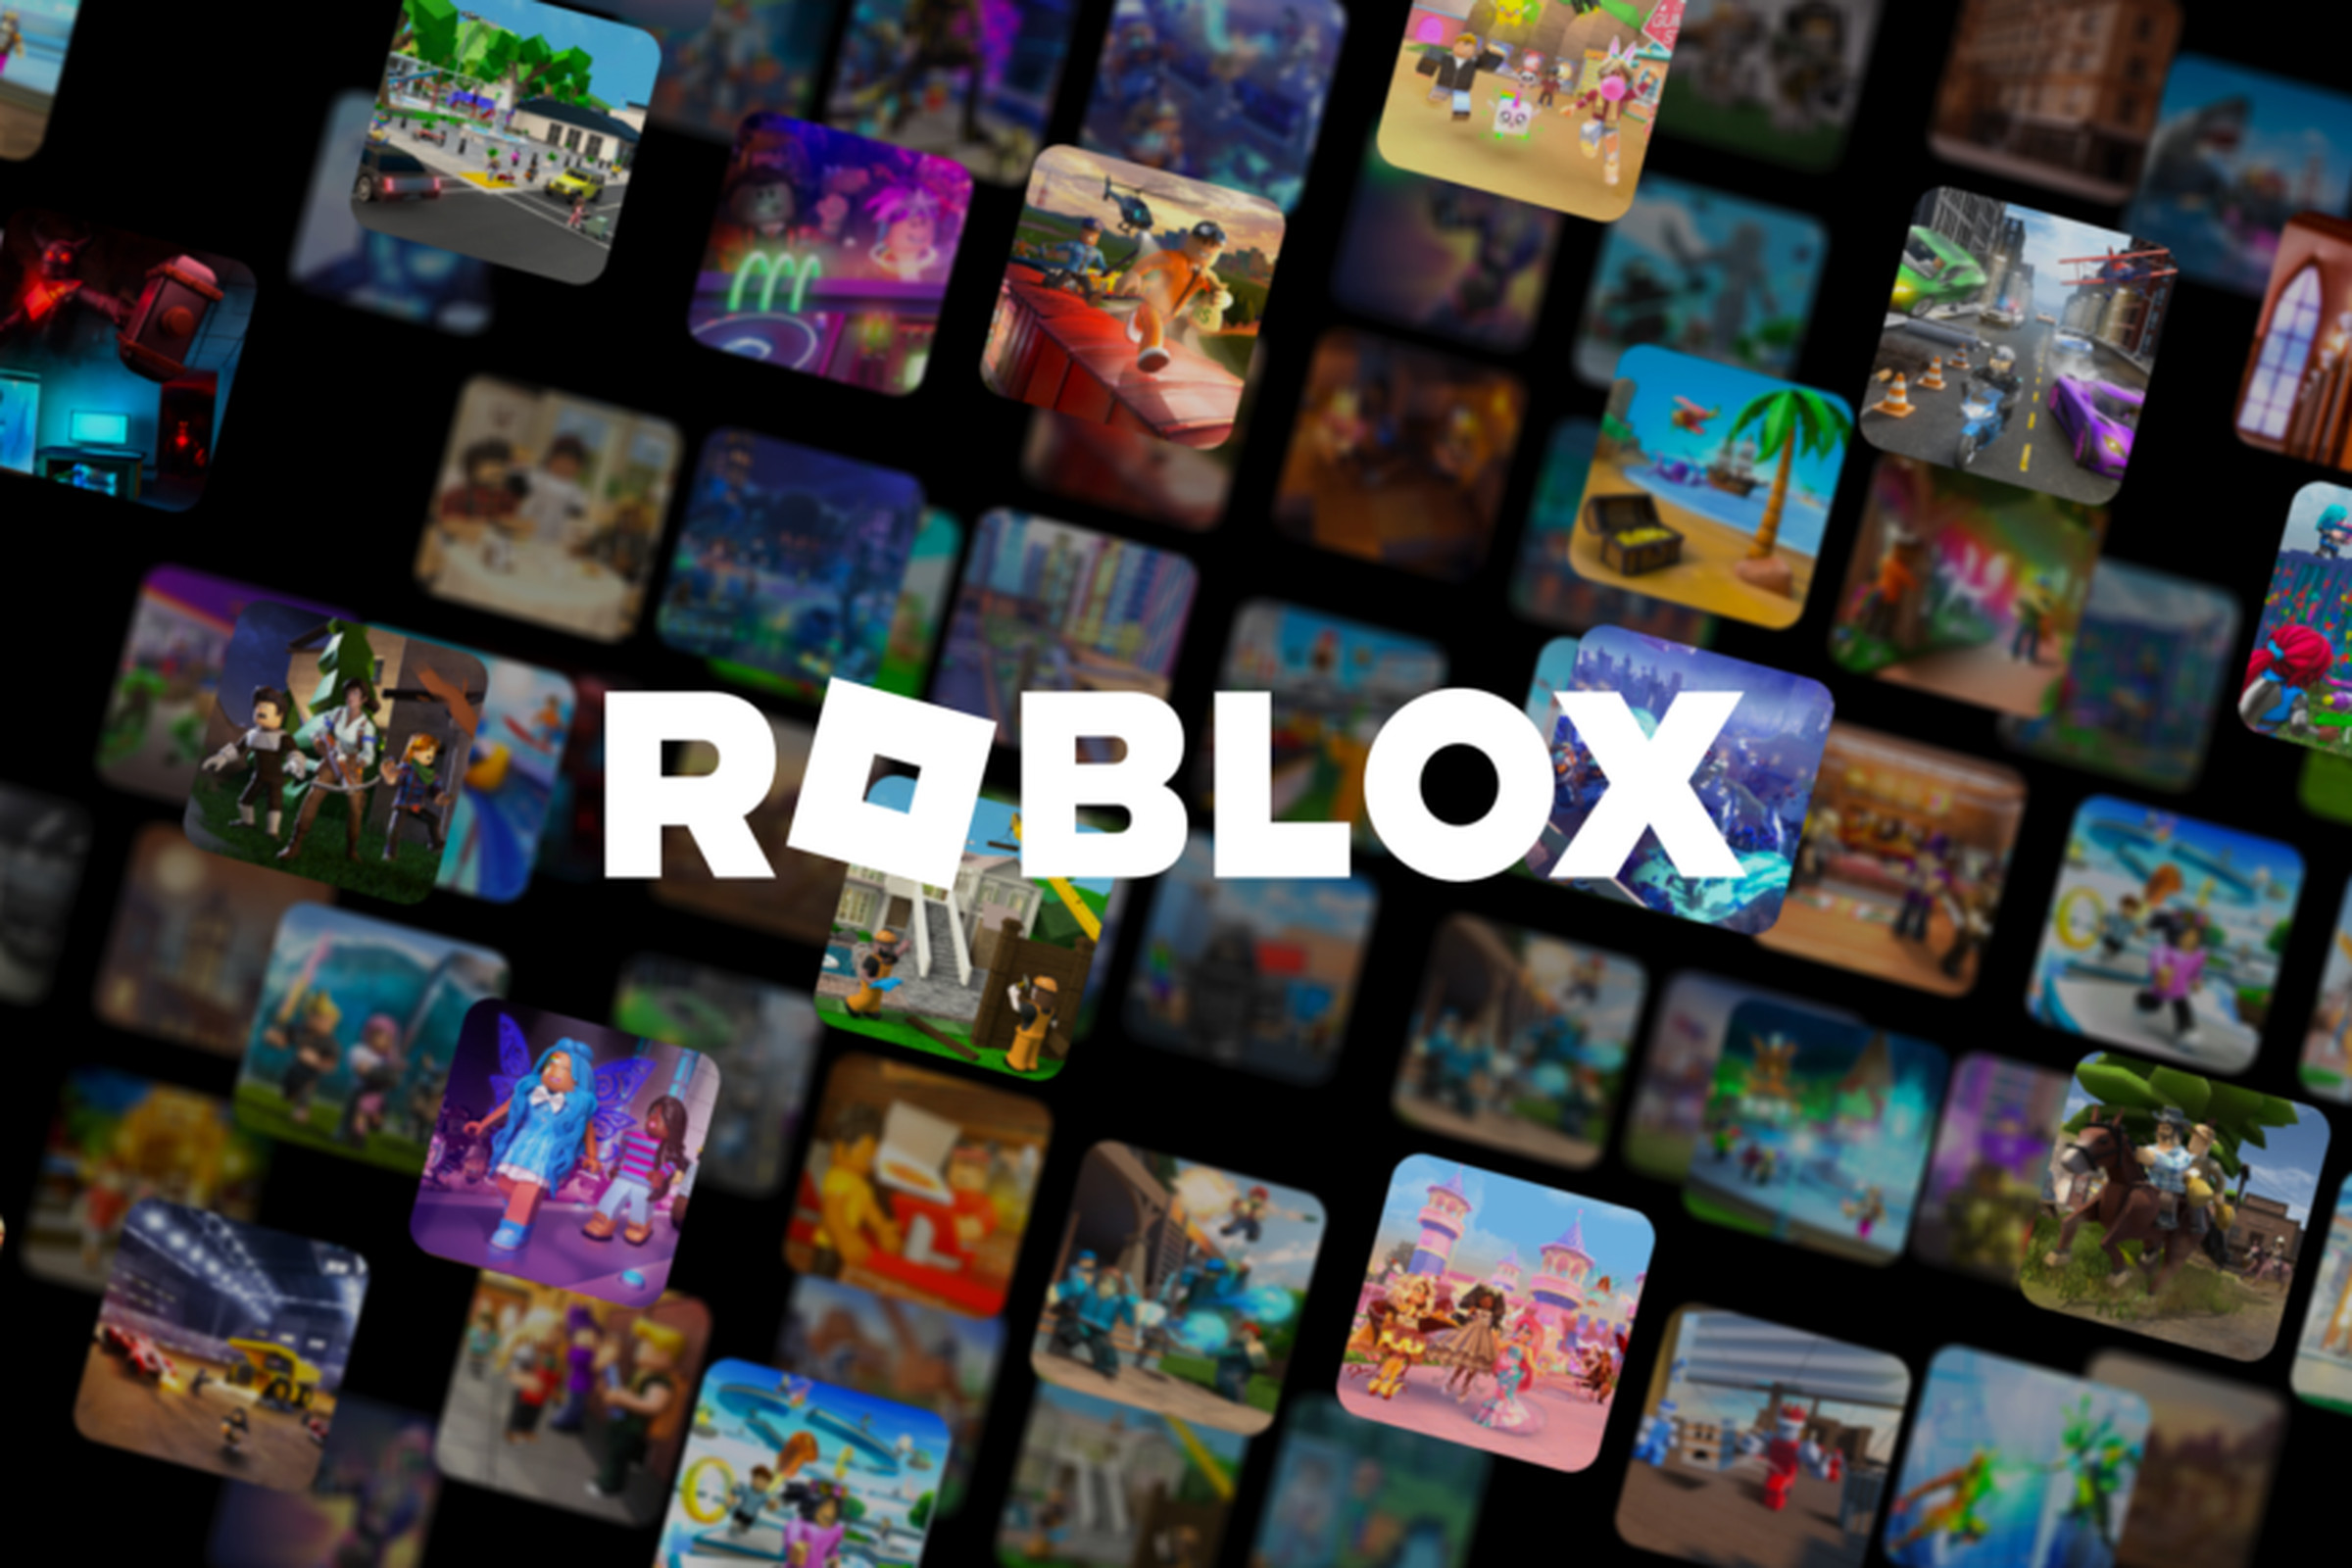 A promotional image for Roblox.